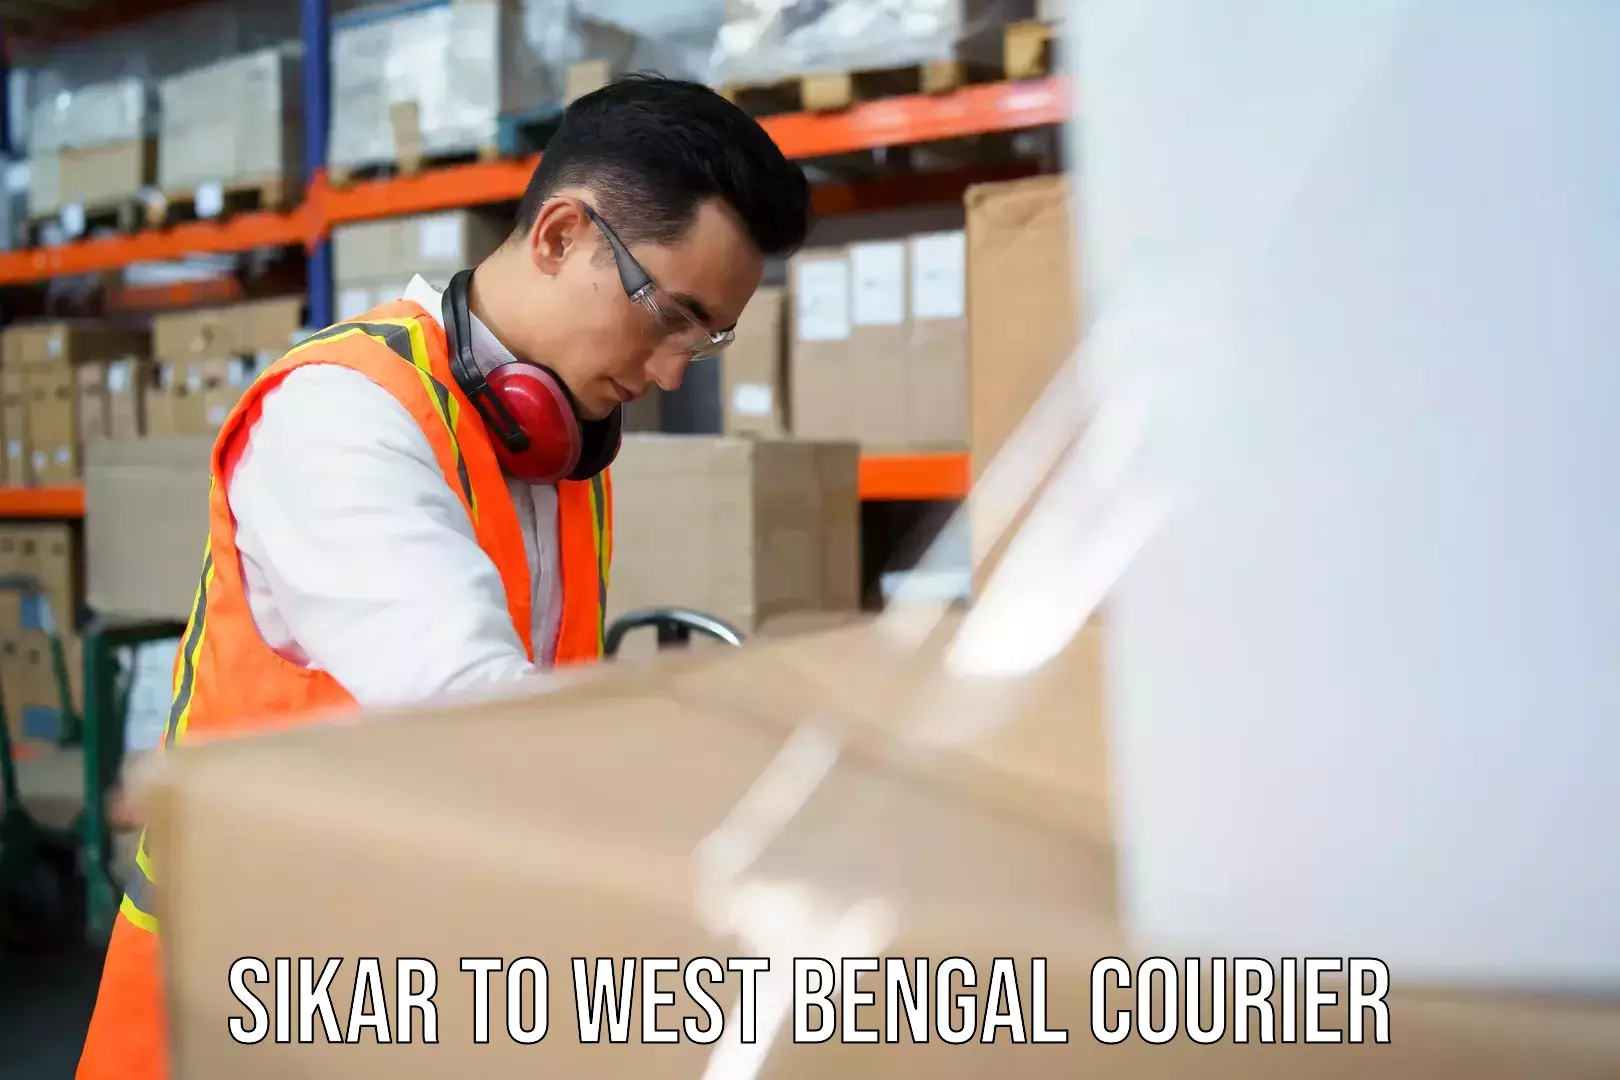 International courier networks Sikar to Raidighi